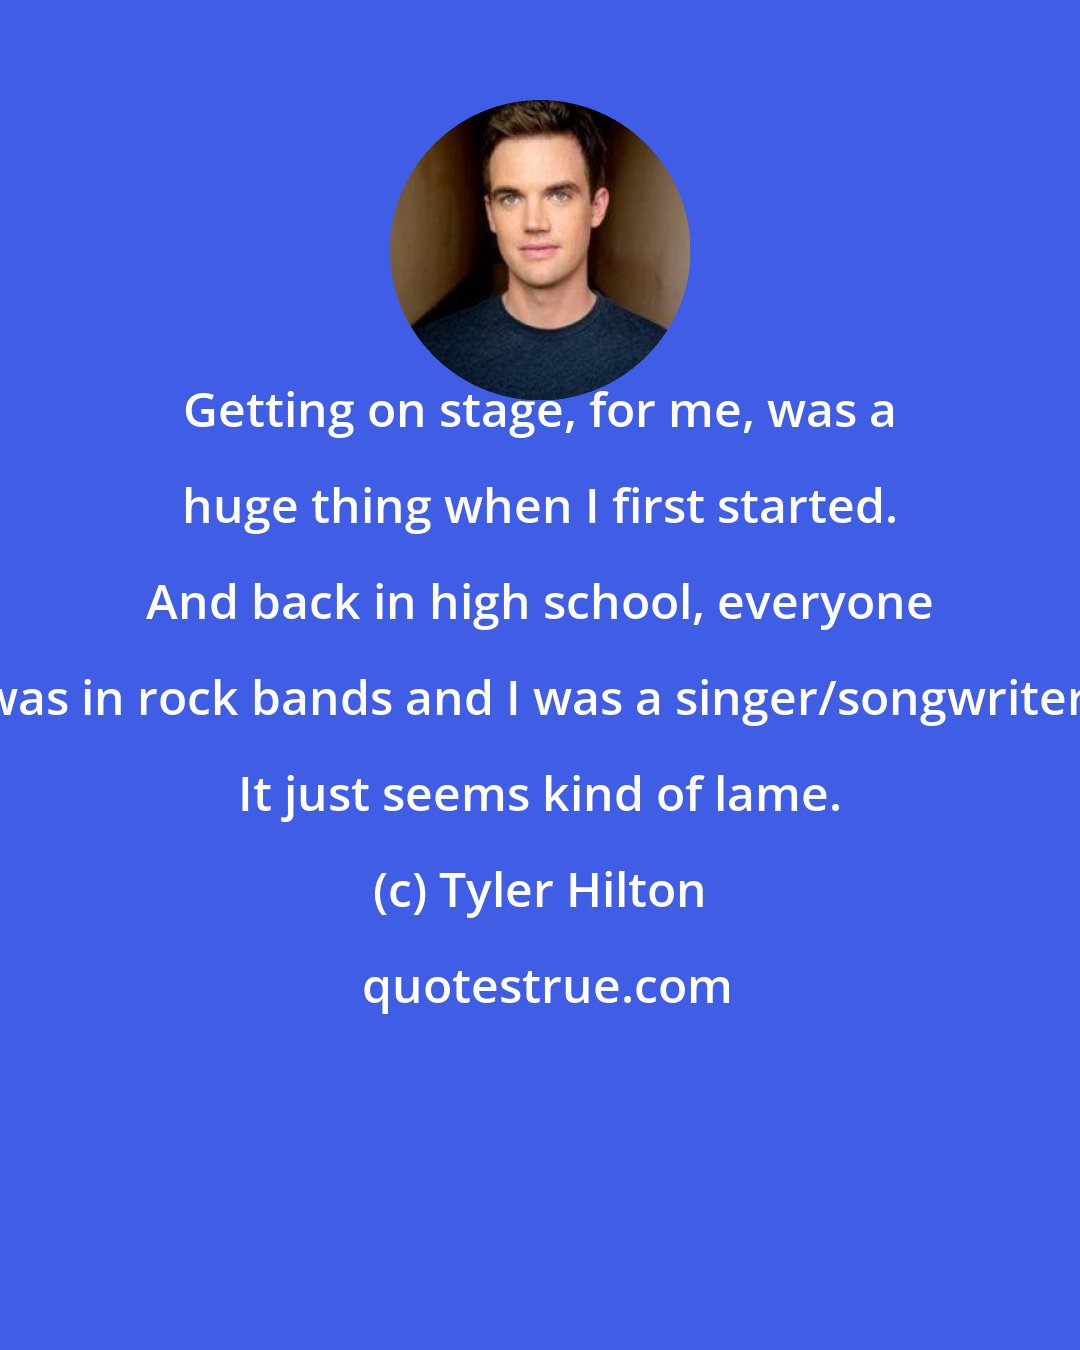 Tyler Hilton: Getting on stage, for me, was a huge thing when I first started. And back in high school, everyone was in rock bands and I was a singer/songwriter. It just seems kind of lame.